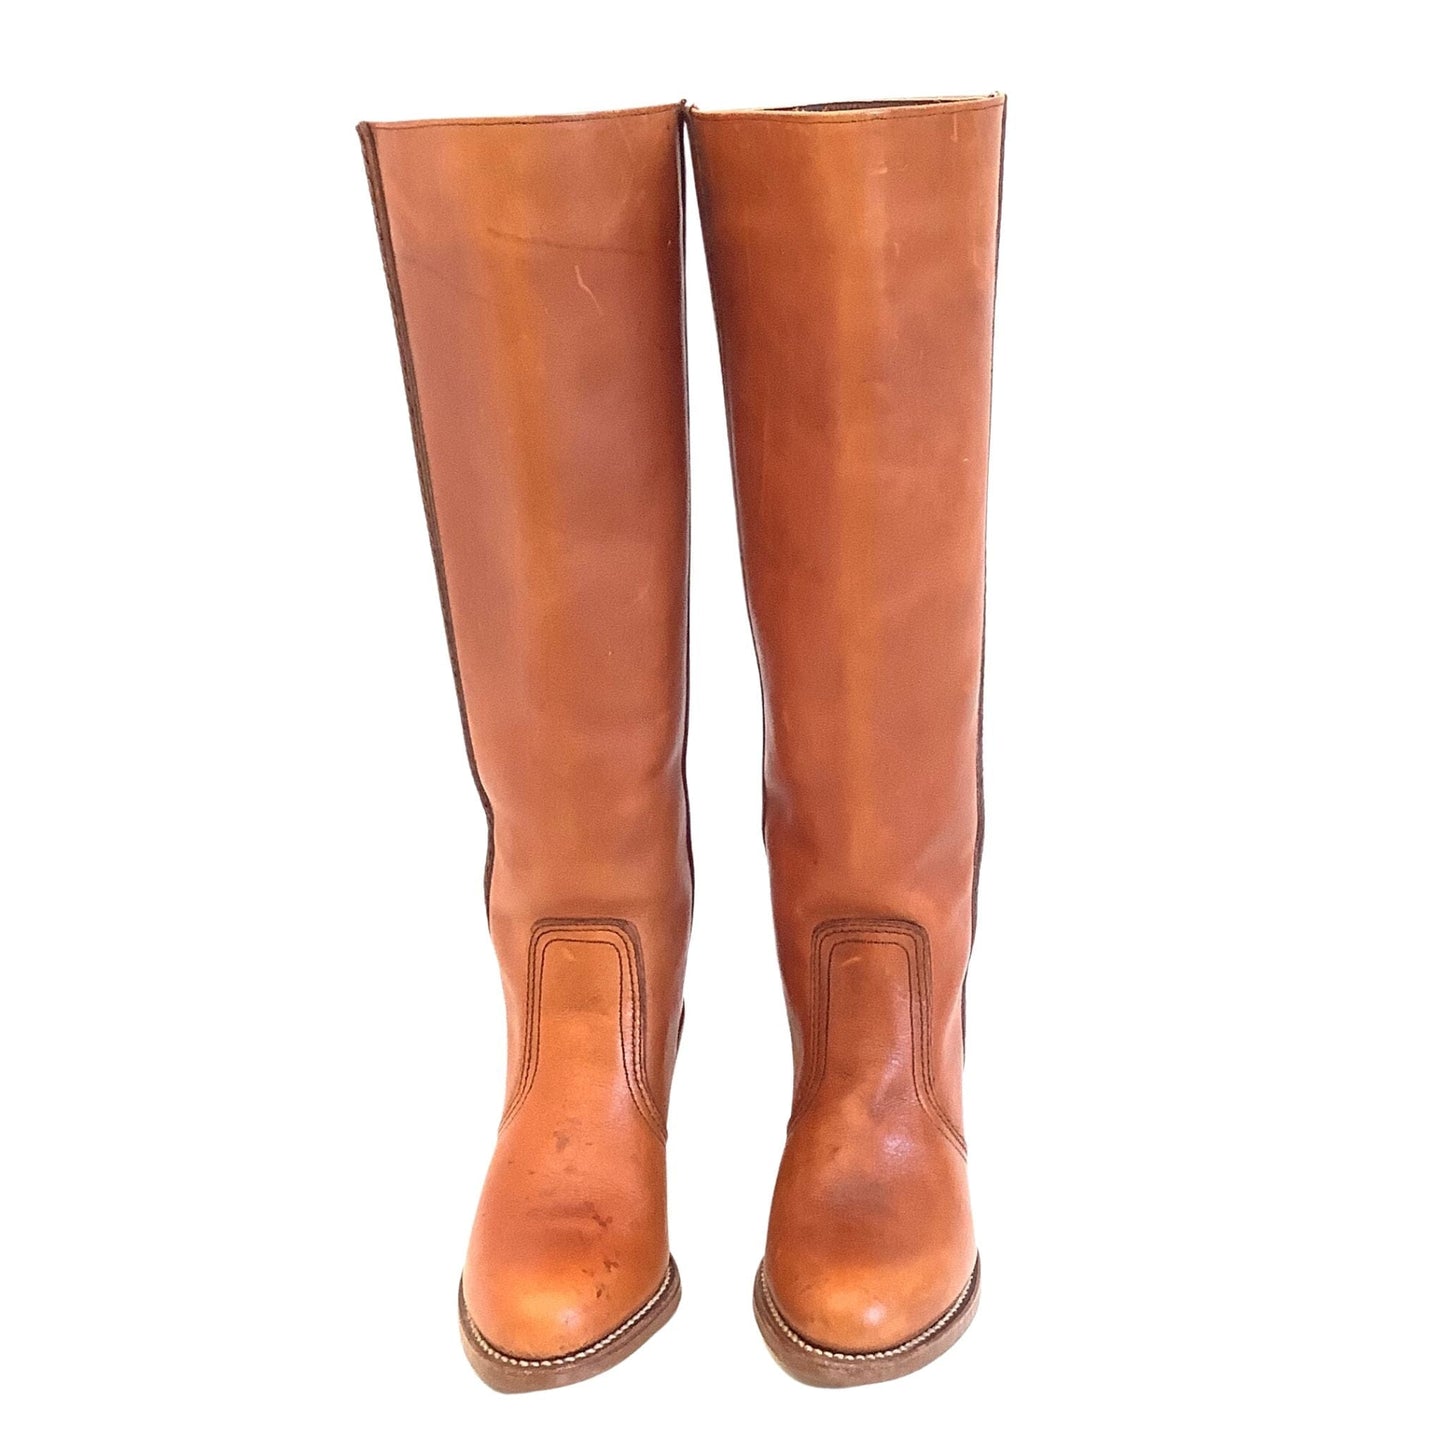 Western Boots Tan Leather 6.5 / Tan / Vintage 1970s